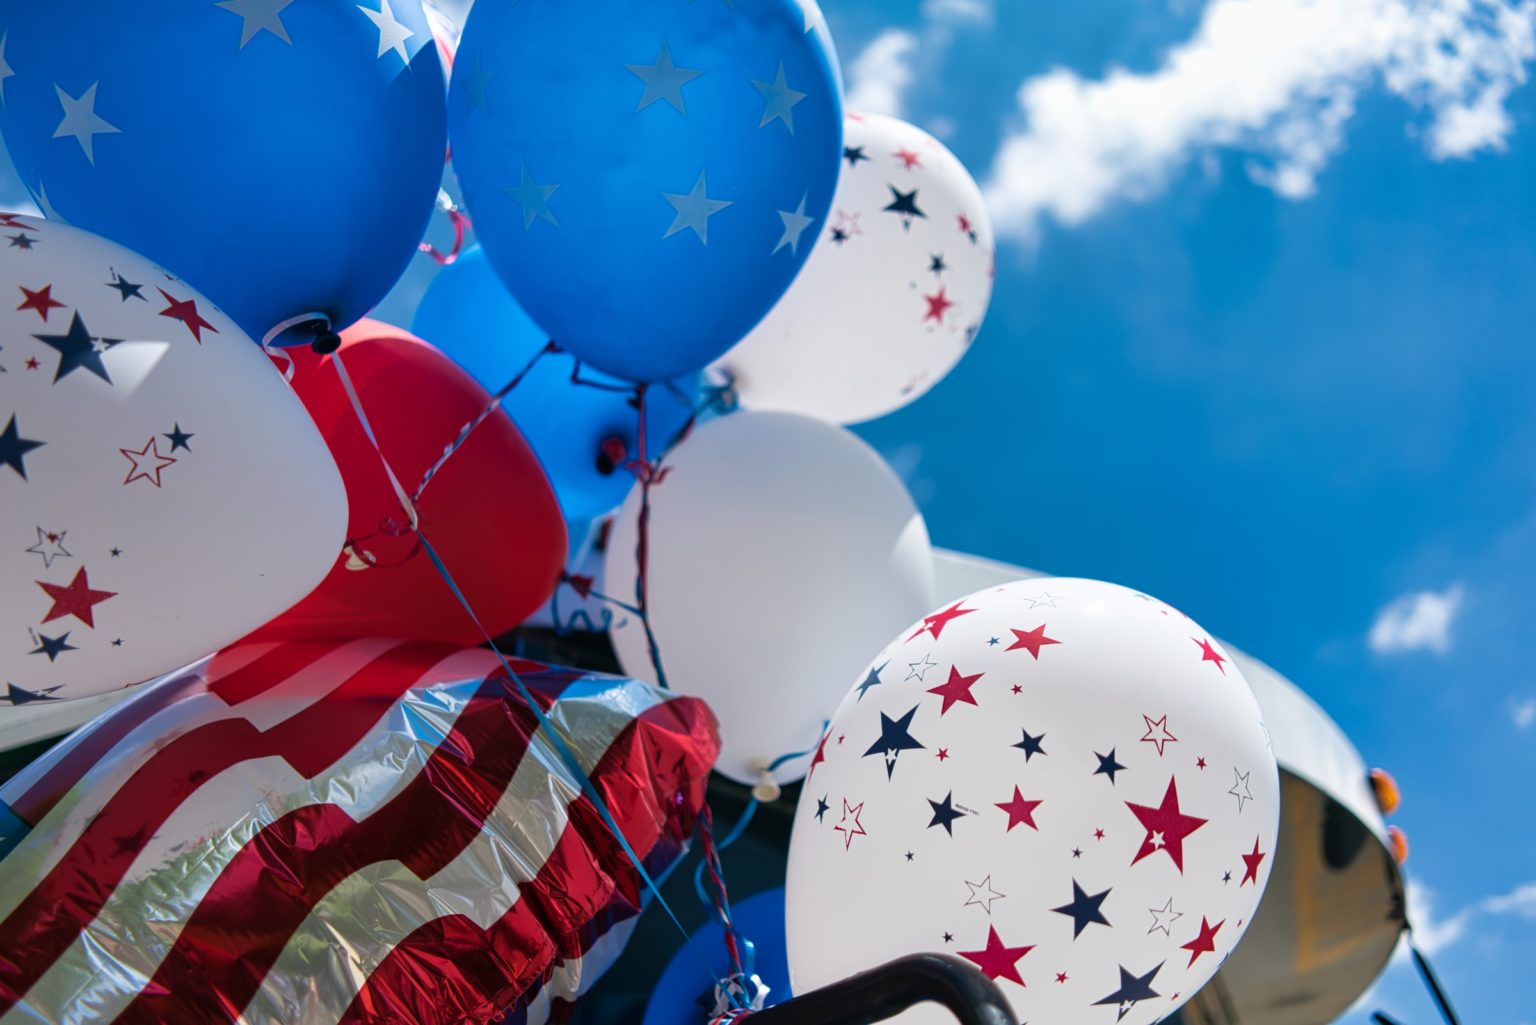 Balloons in red, white, blue, and white with red and blue speckled stars. An American flag in the corner.